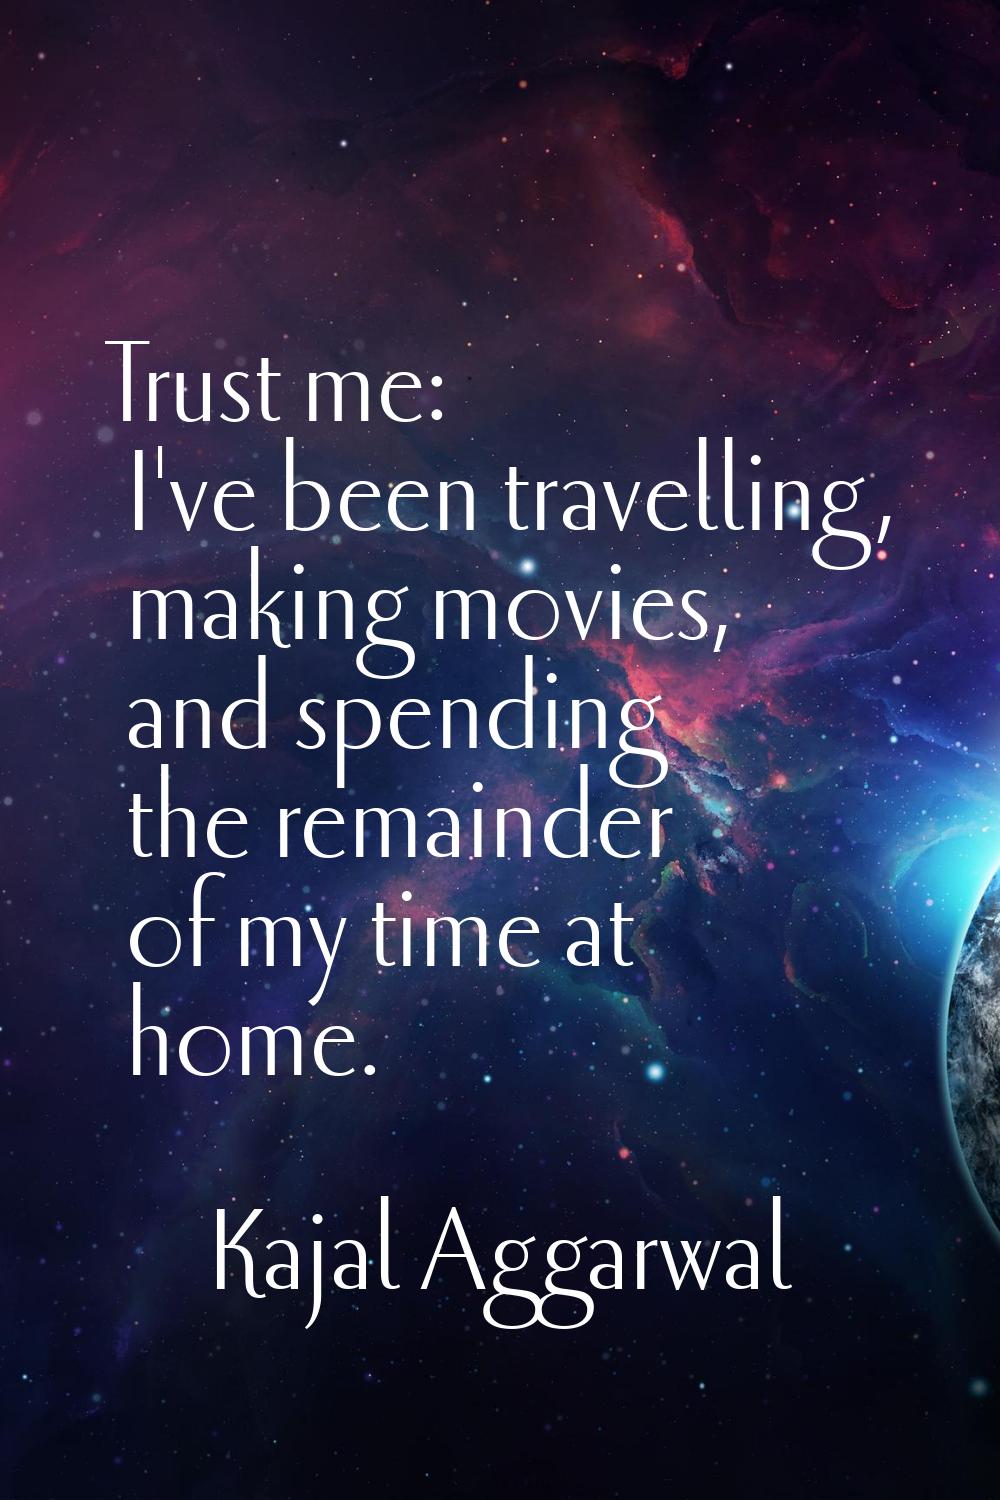 Trust me: I've been travelling, making movies, and spending the remainder of my time at home.